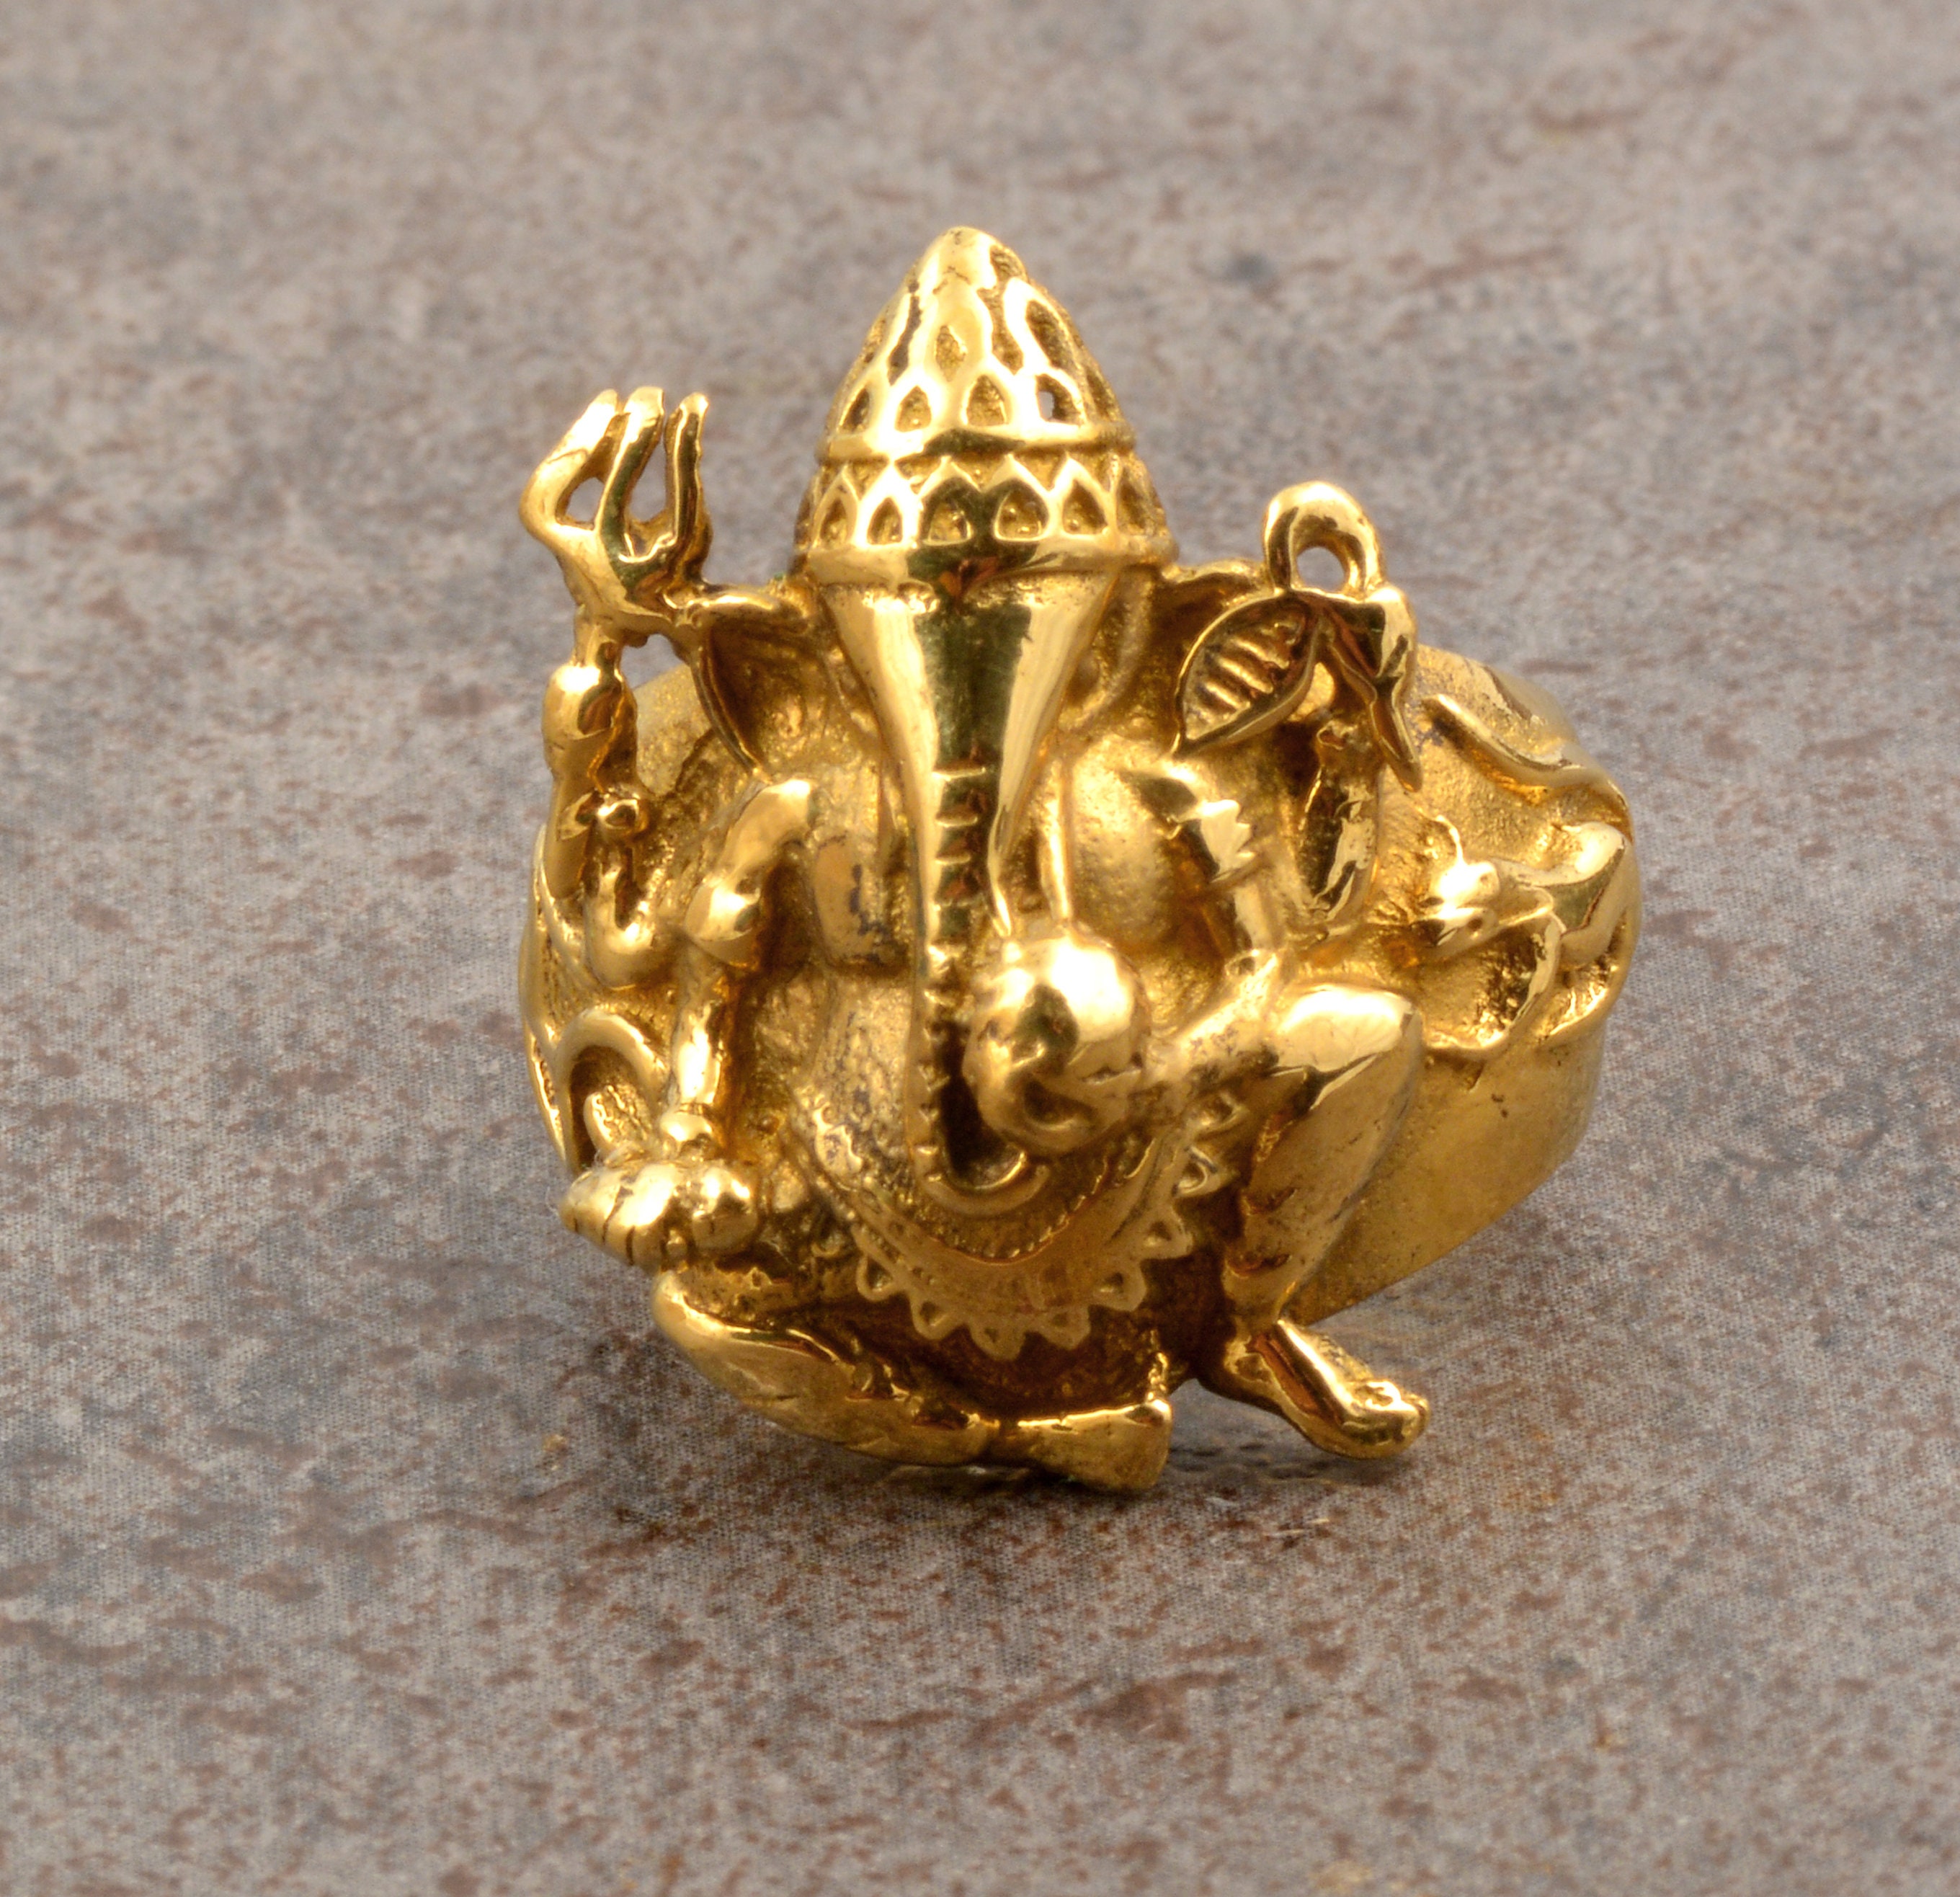 Unisex 92.5 925 Sterling Silver Lord Ganesha Ring at Rs 100/gram in Jaipur